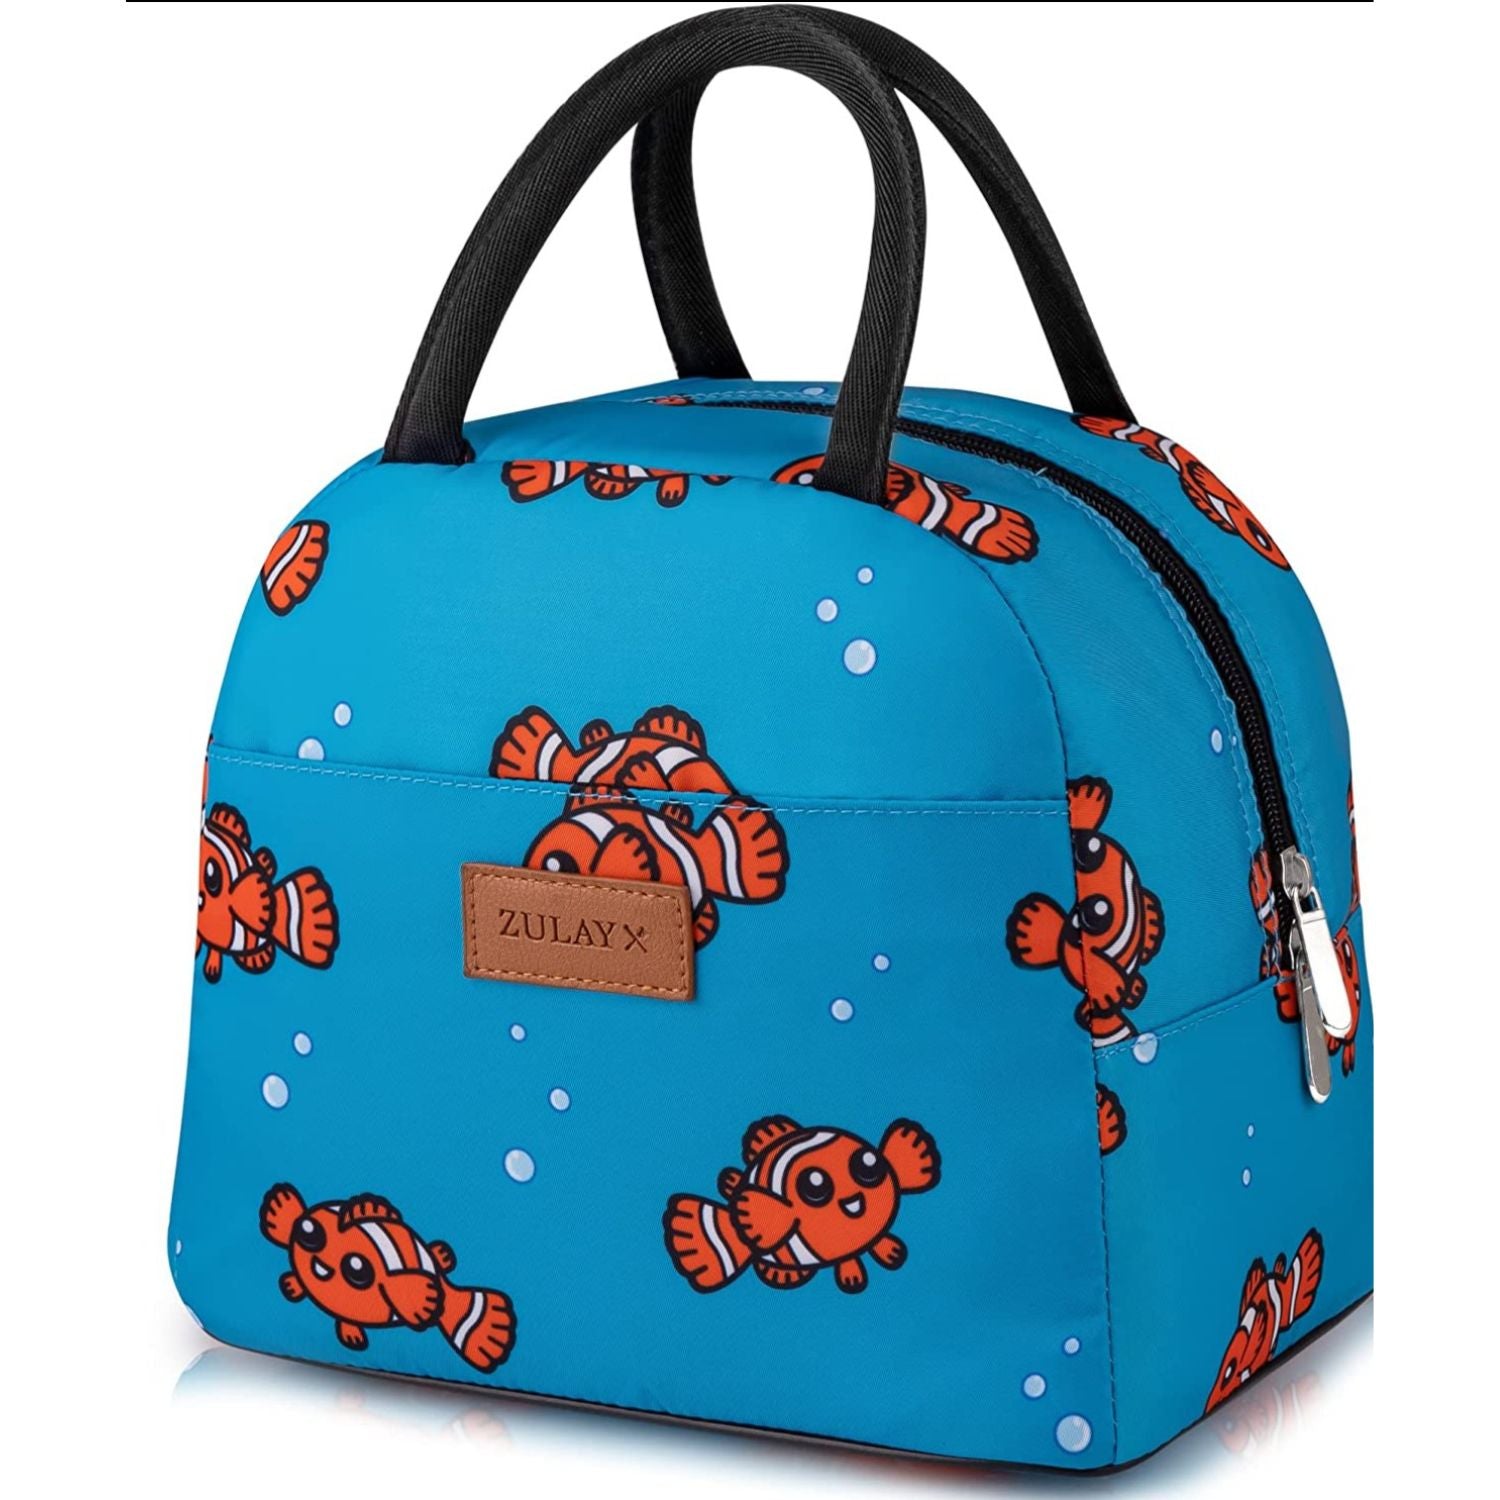 Zulay Insulated Lunch Bag - Thermal Kids Lunch Bag With Spacious